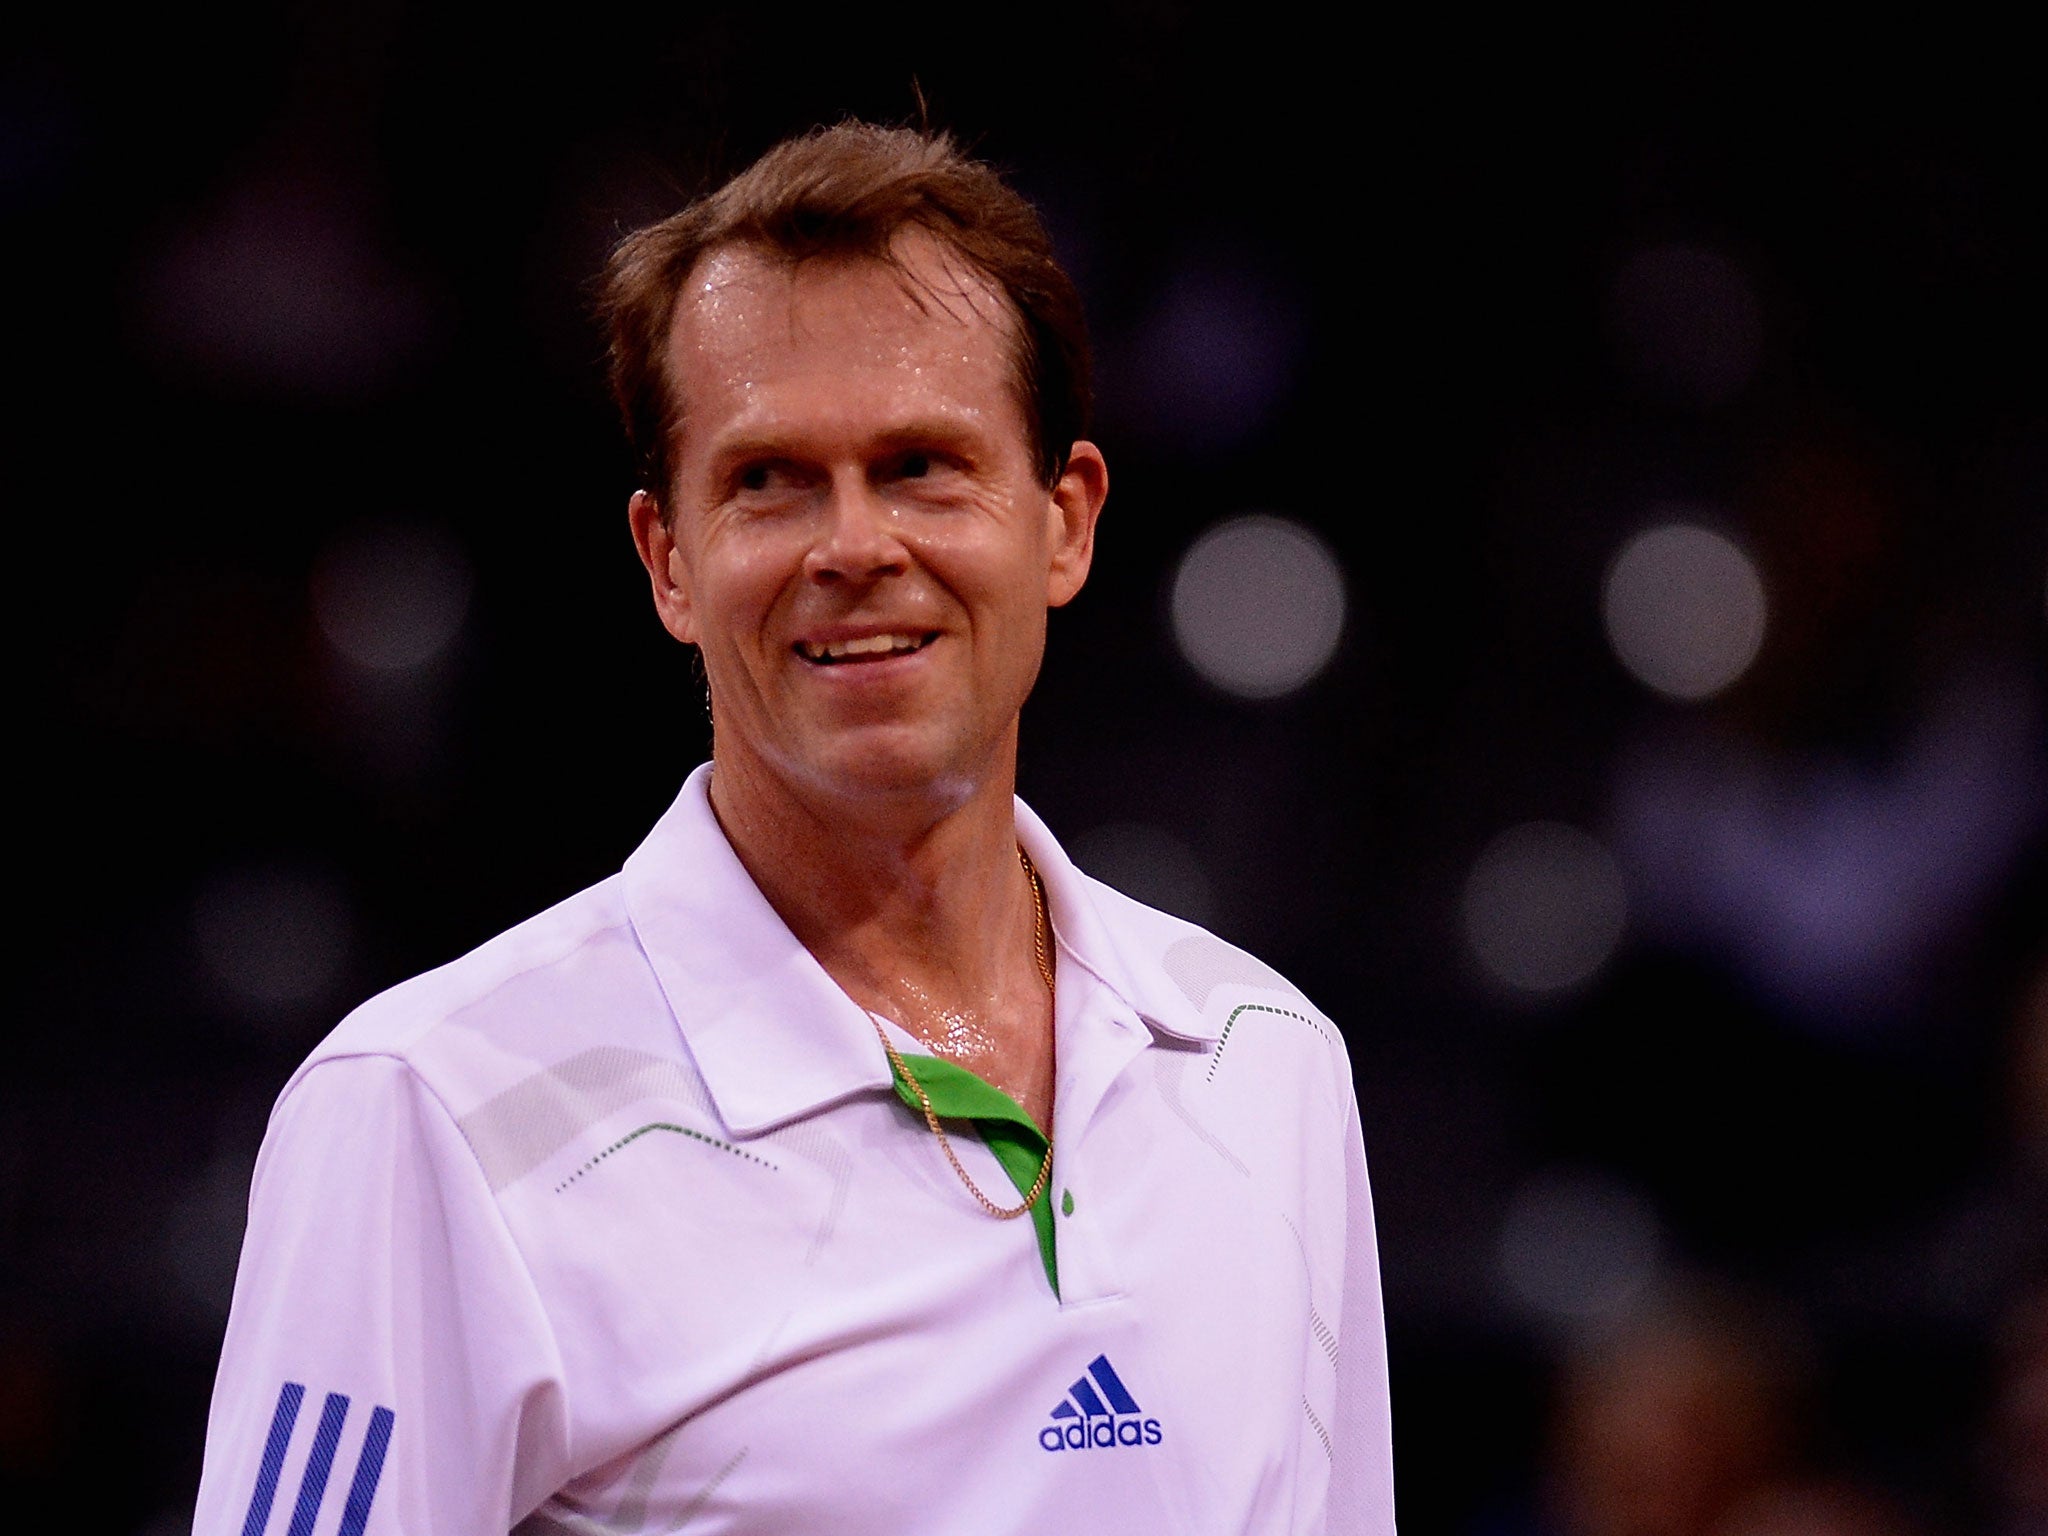 Stefan Edberg was the centre of attention on Monday at the Australian Open as he returned to court in a coaching role with Roger Federer